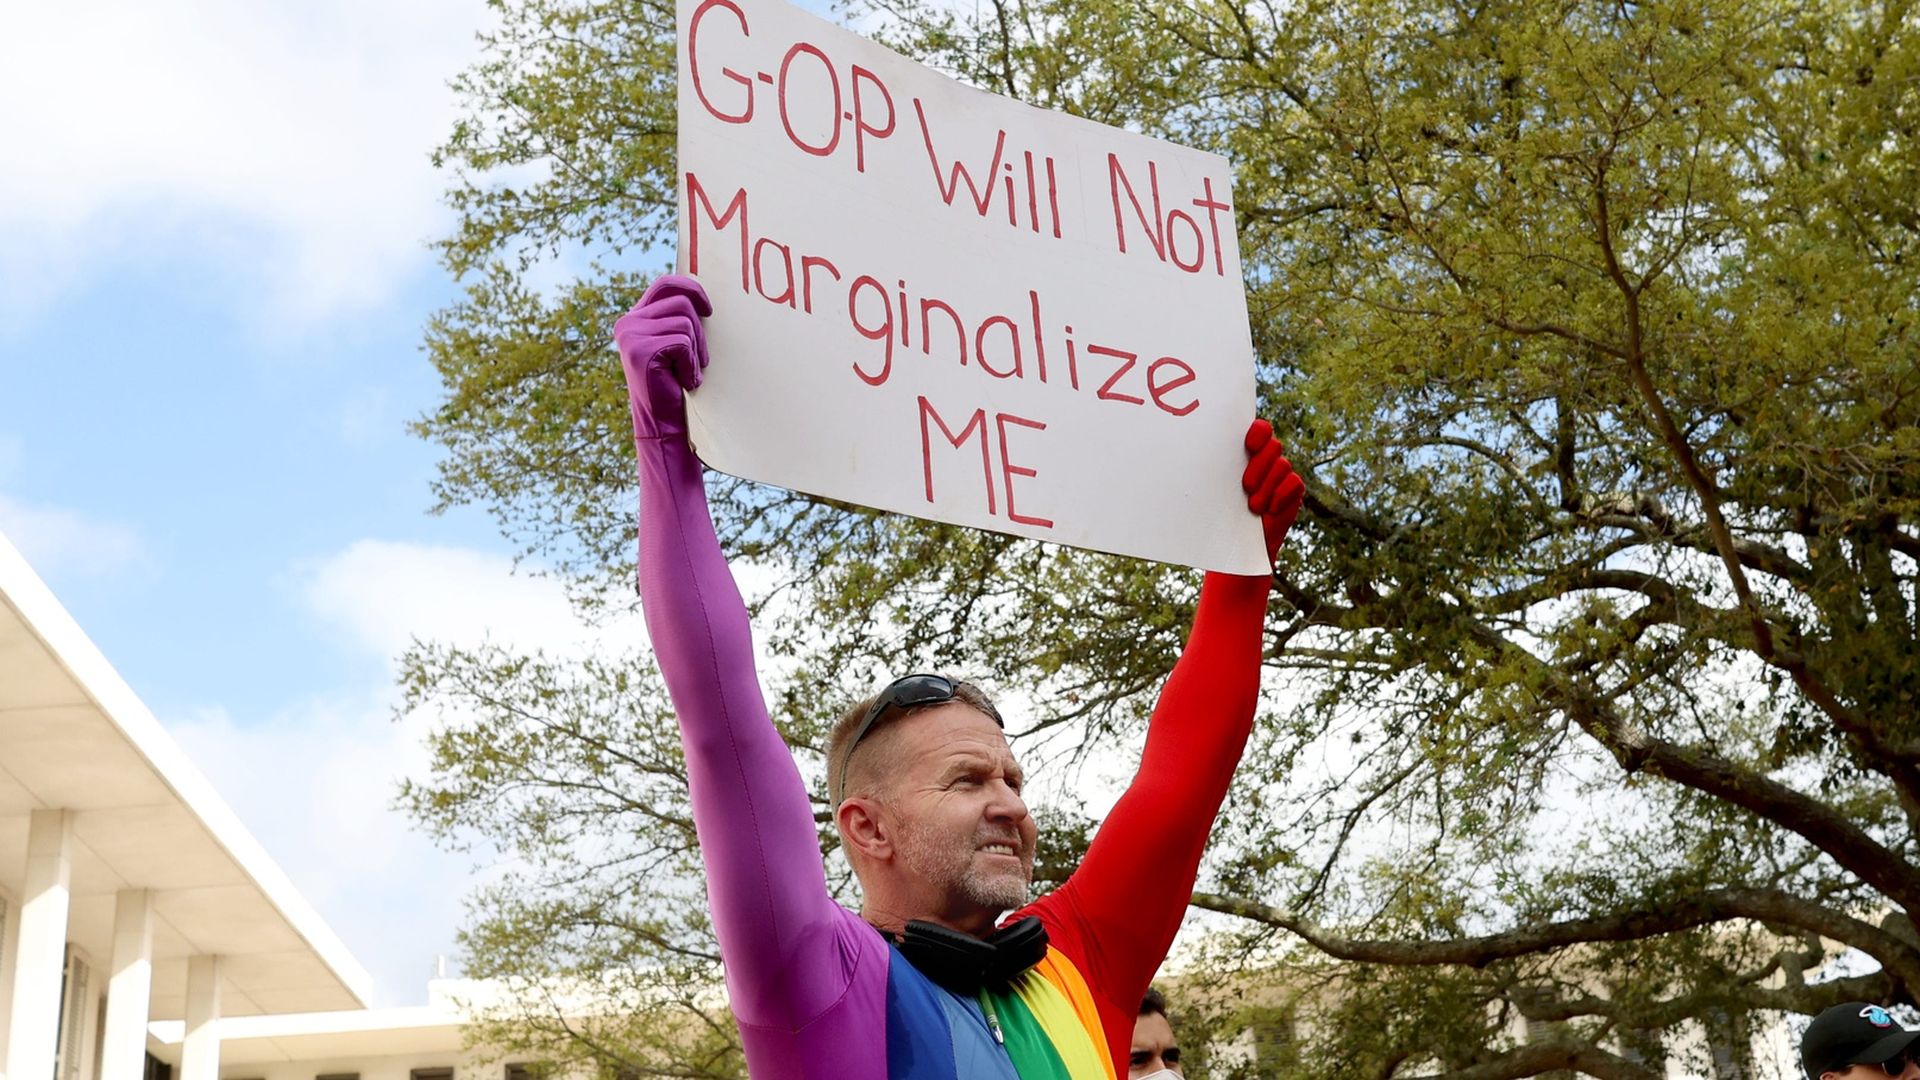 A person in a rainbow bodysuit holds up a sign reading "GOP Will Not Marginalize ME"